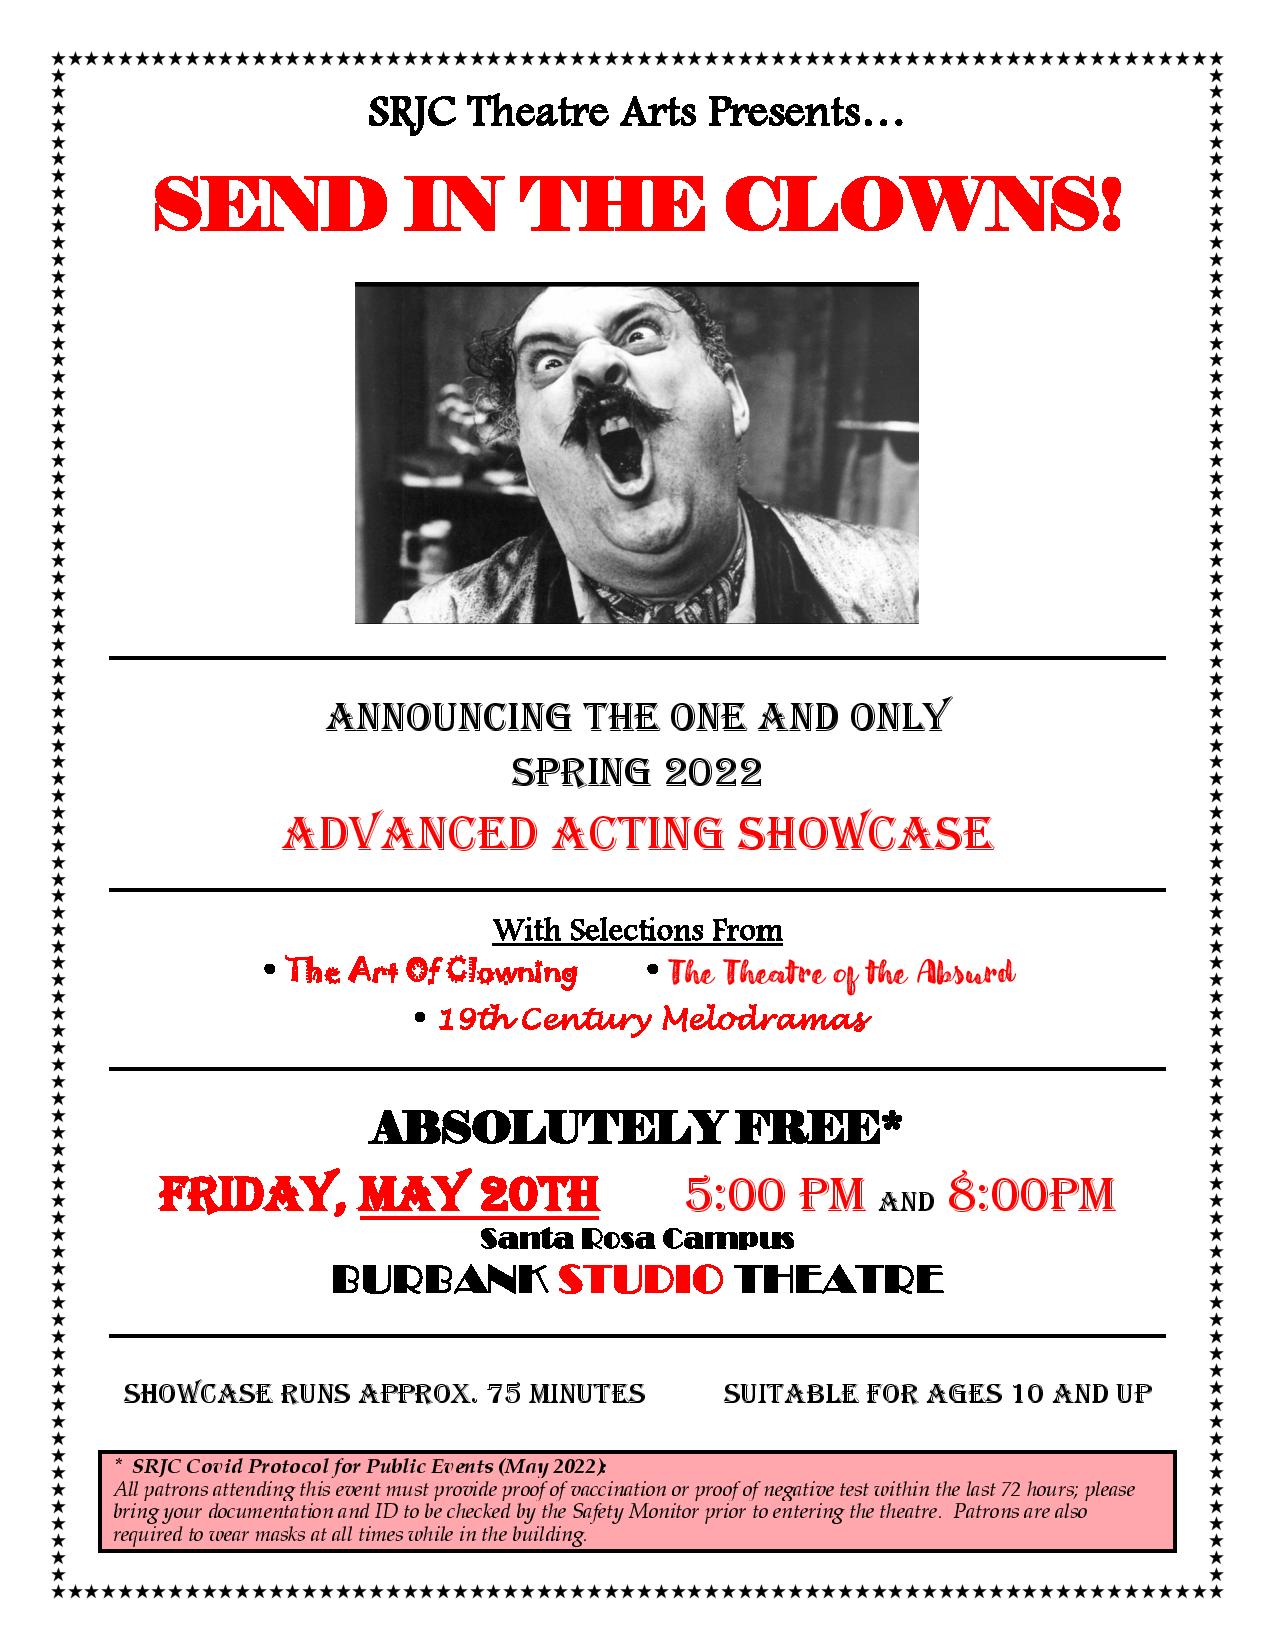 SRJC Theatre Arts Presents…  SEND IN THE CLOWNS!  ANNOUNCING THE ONE AND ONLY SPRING 2022 ADVANCED ACTING SHOWCASE With Selections From  • The Art Of Clowning • The Theatre of the Absurd  • 19th Century Melodramas  ABSOLUTELY FREE*  FRIDAY, MAY 20TH 5:00 PM AND 8:00PM Santa Rosa Campus  BURBANK STUDIO THEATRE  SHOWCASE RUNS APPROX. 75 MINUTES SUITABLE FOR AGES 10 AND UP